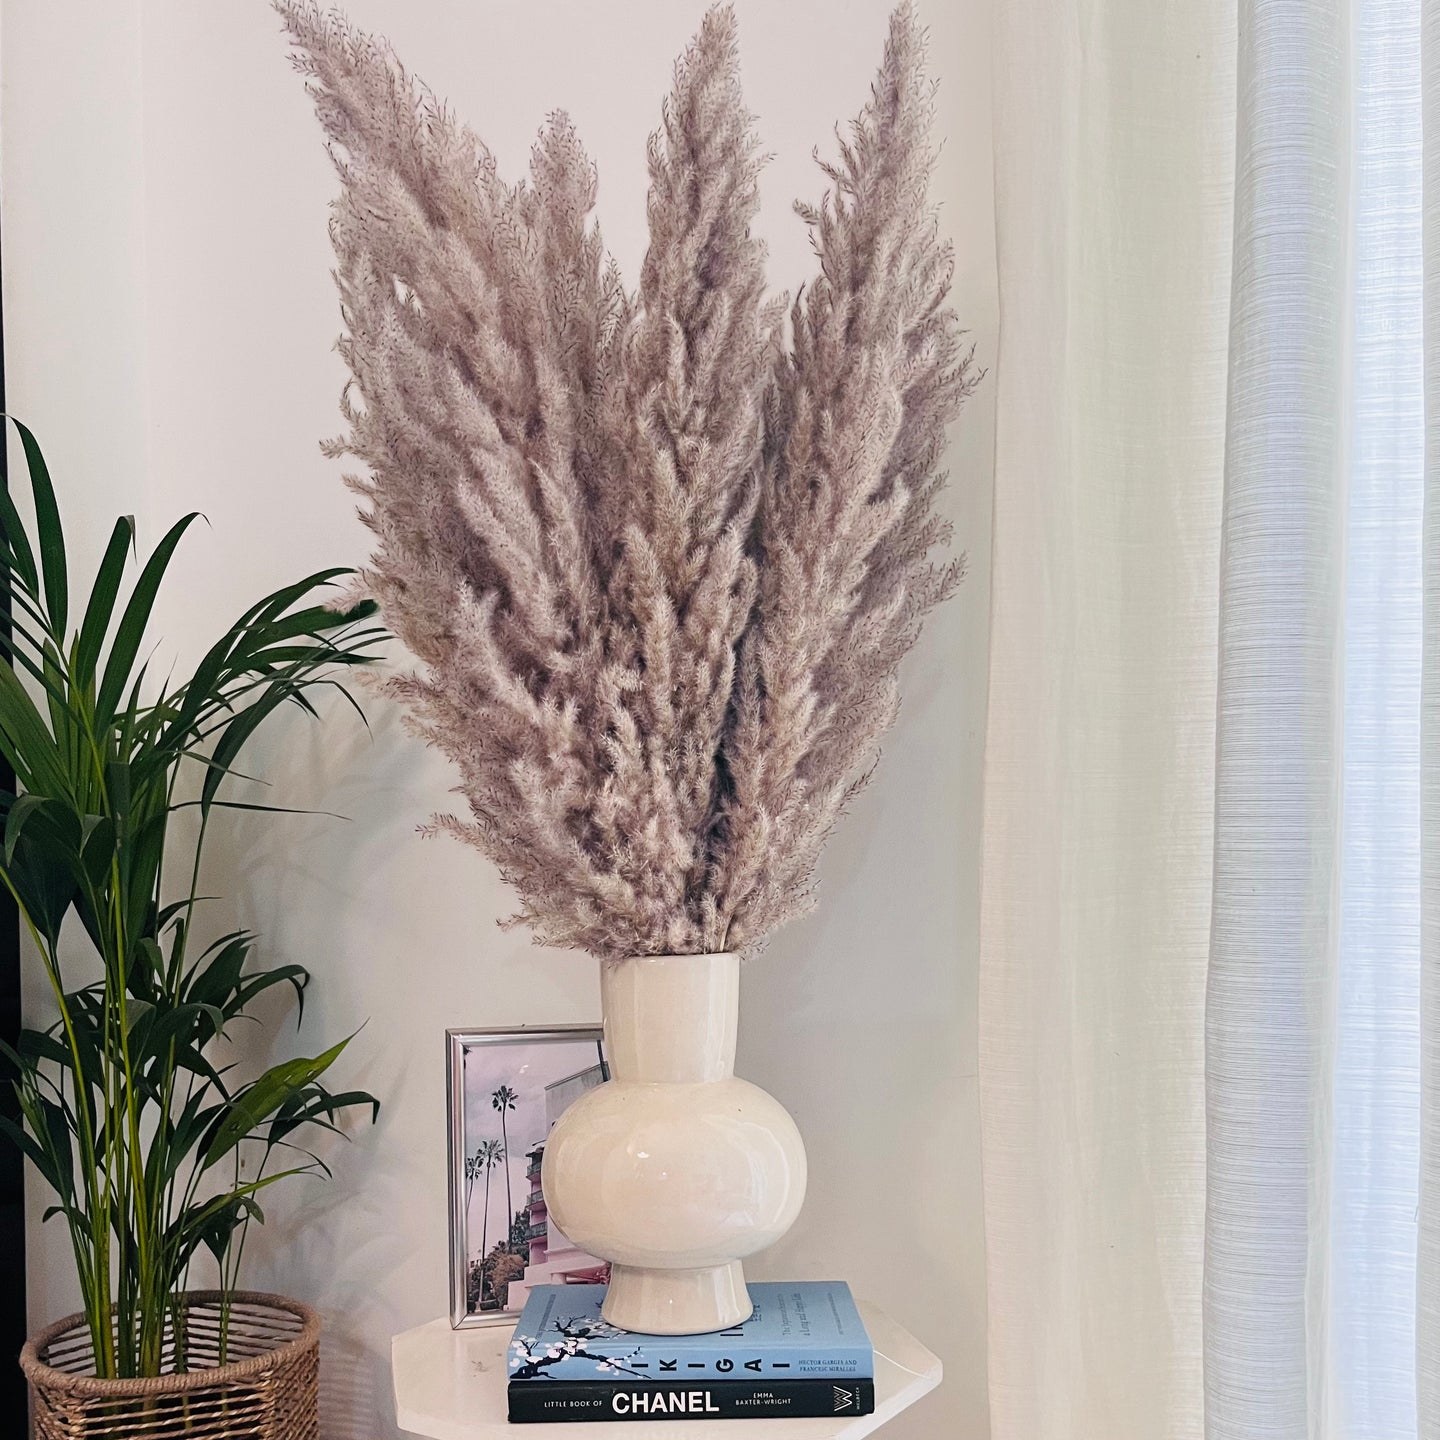 Gourd vase with Tall Pampas set